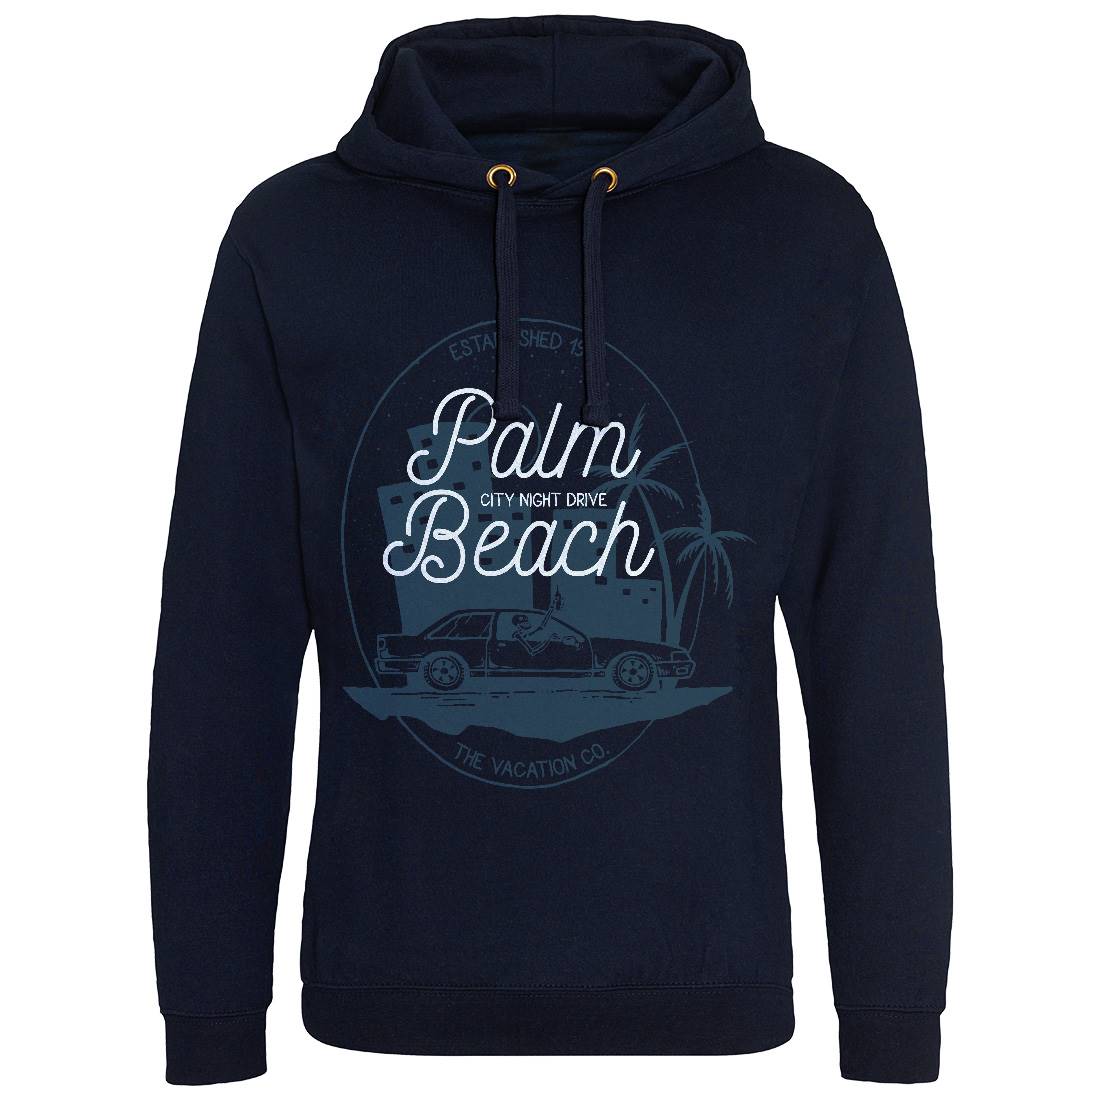 City Night Drive Mens Hoodie Without Pocket Holiday C717